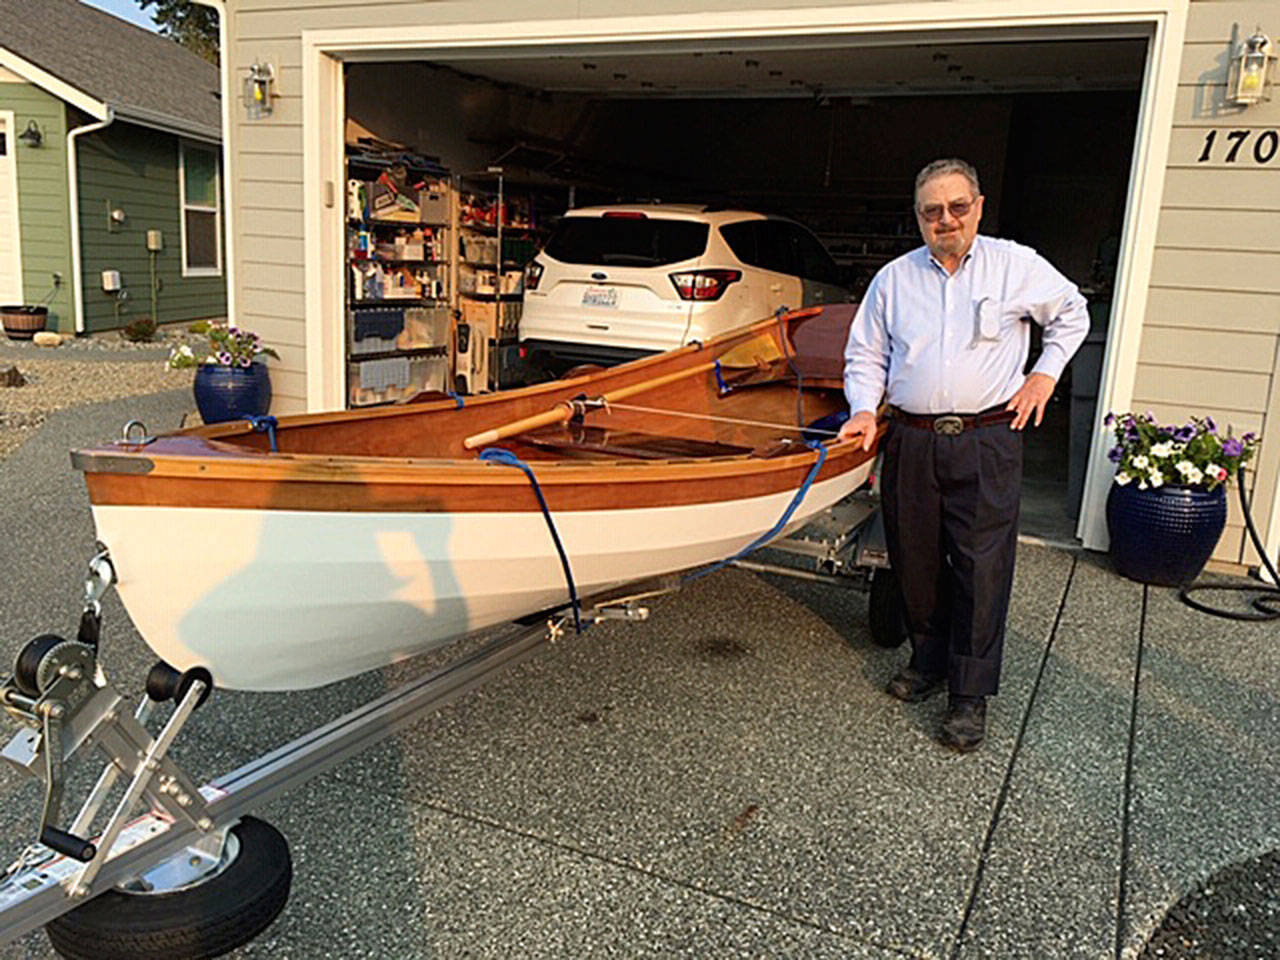 David Hough of Sequim stands by his wherry he built from a kit during the past few months. The “Planet X” saw its maiden voyage in Sequim Bay in late September. Submitted photo